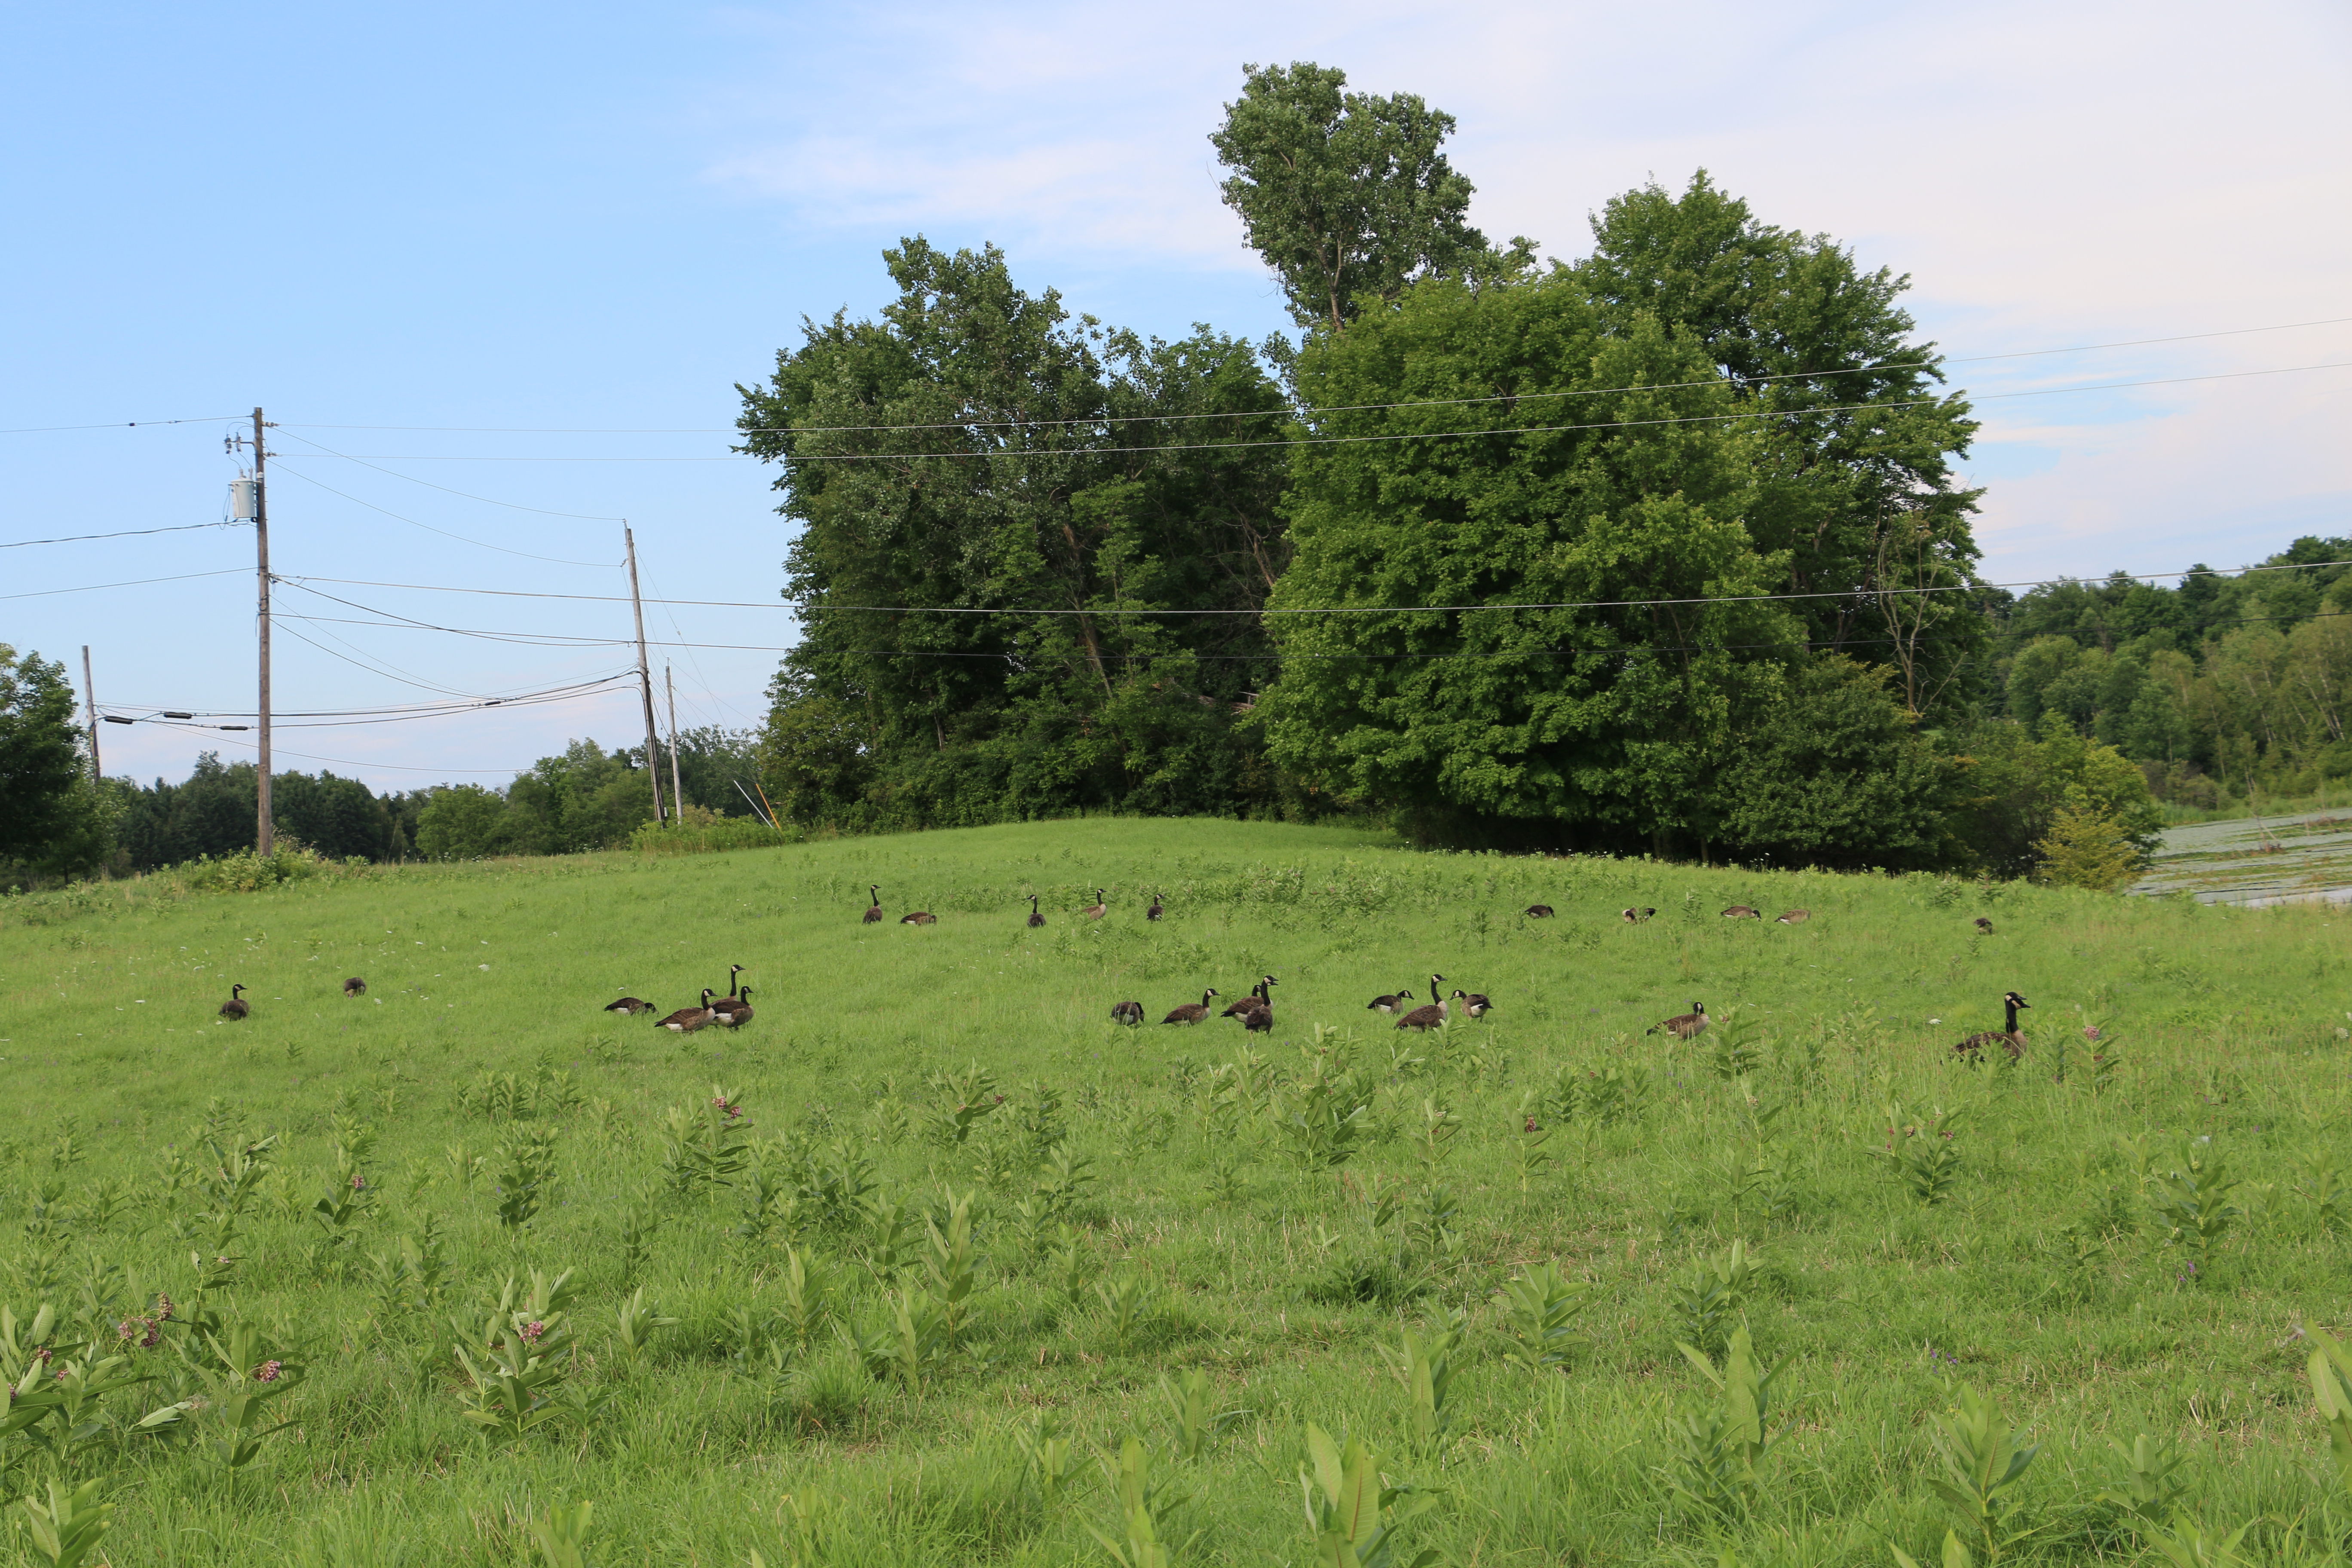 A flock of Canadian Geese in an open field, trees and telephone wires in the background